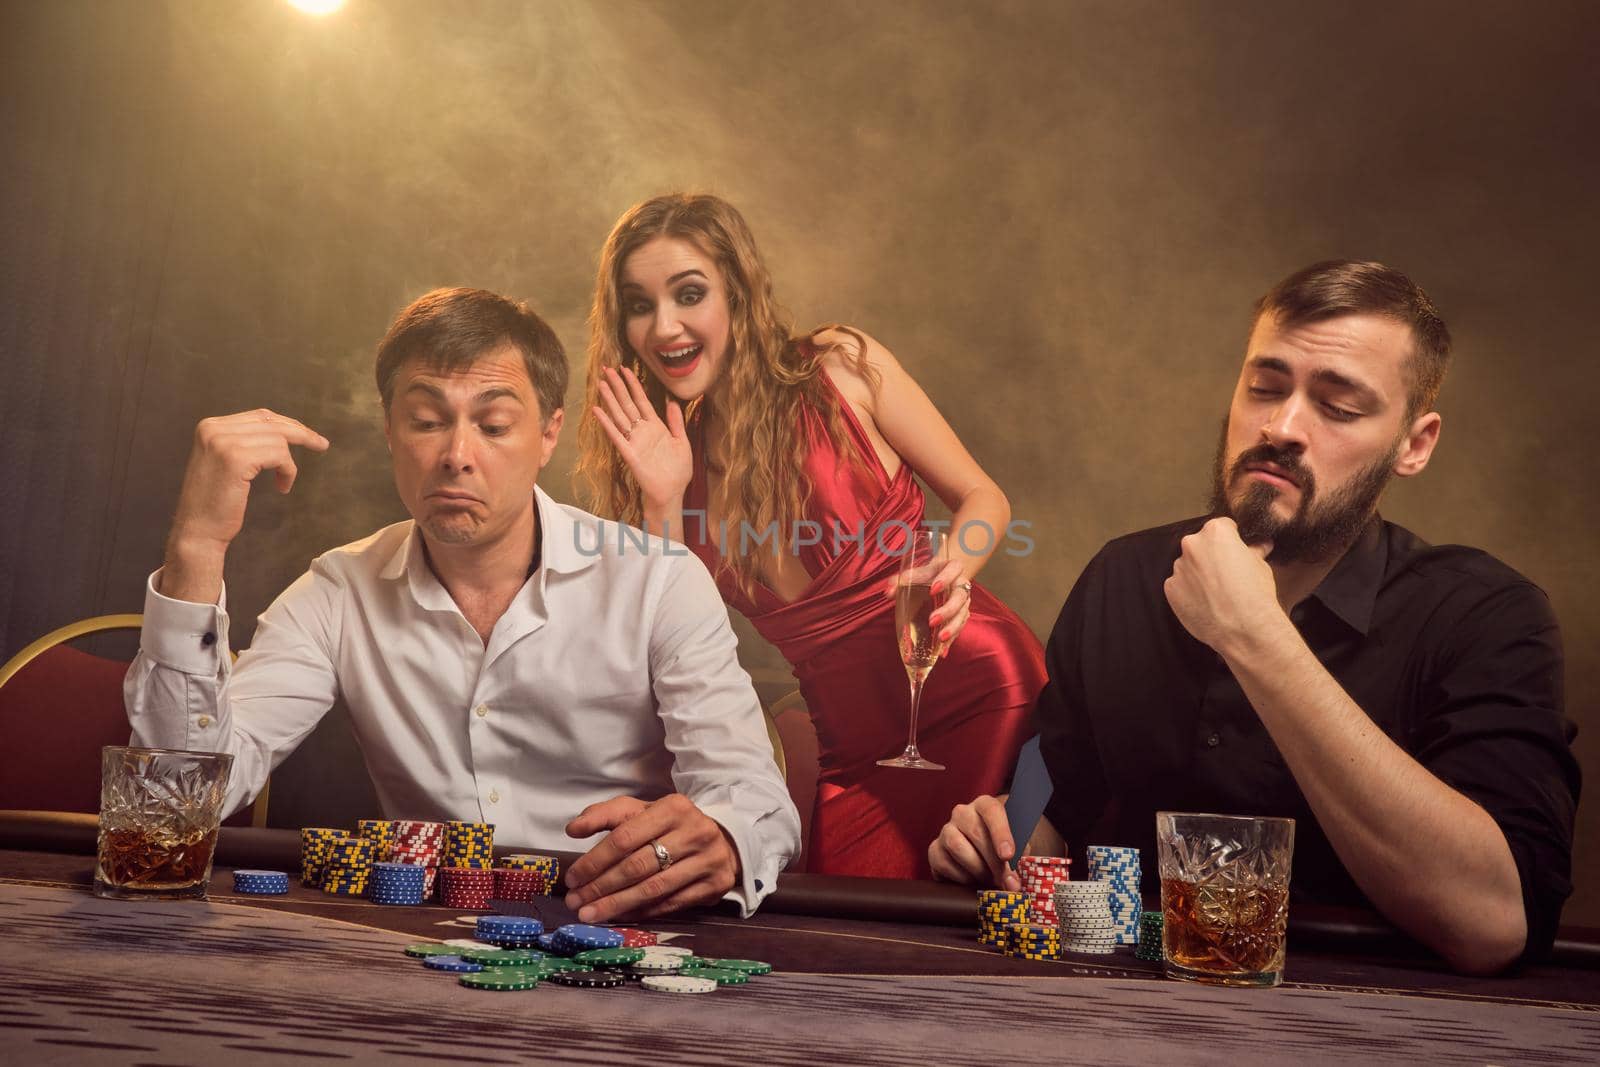 Two old friends and attractive woman are playing poker at casino. They are making bets waiting for a big win while posing at the table against a yellow backlight on smoke background. Cards, chips, money, gambling, entertainment concept.